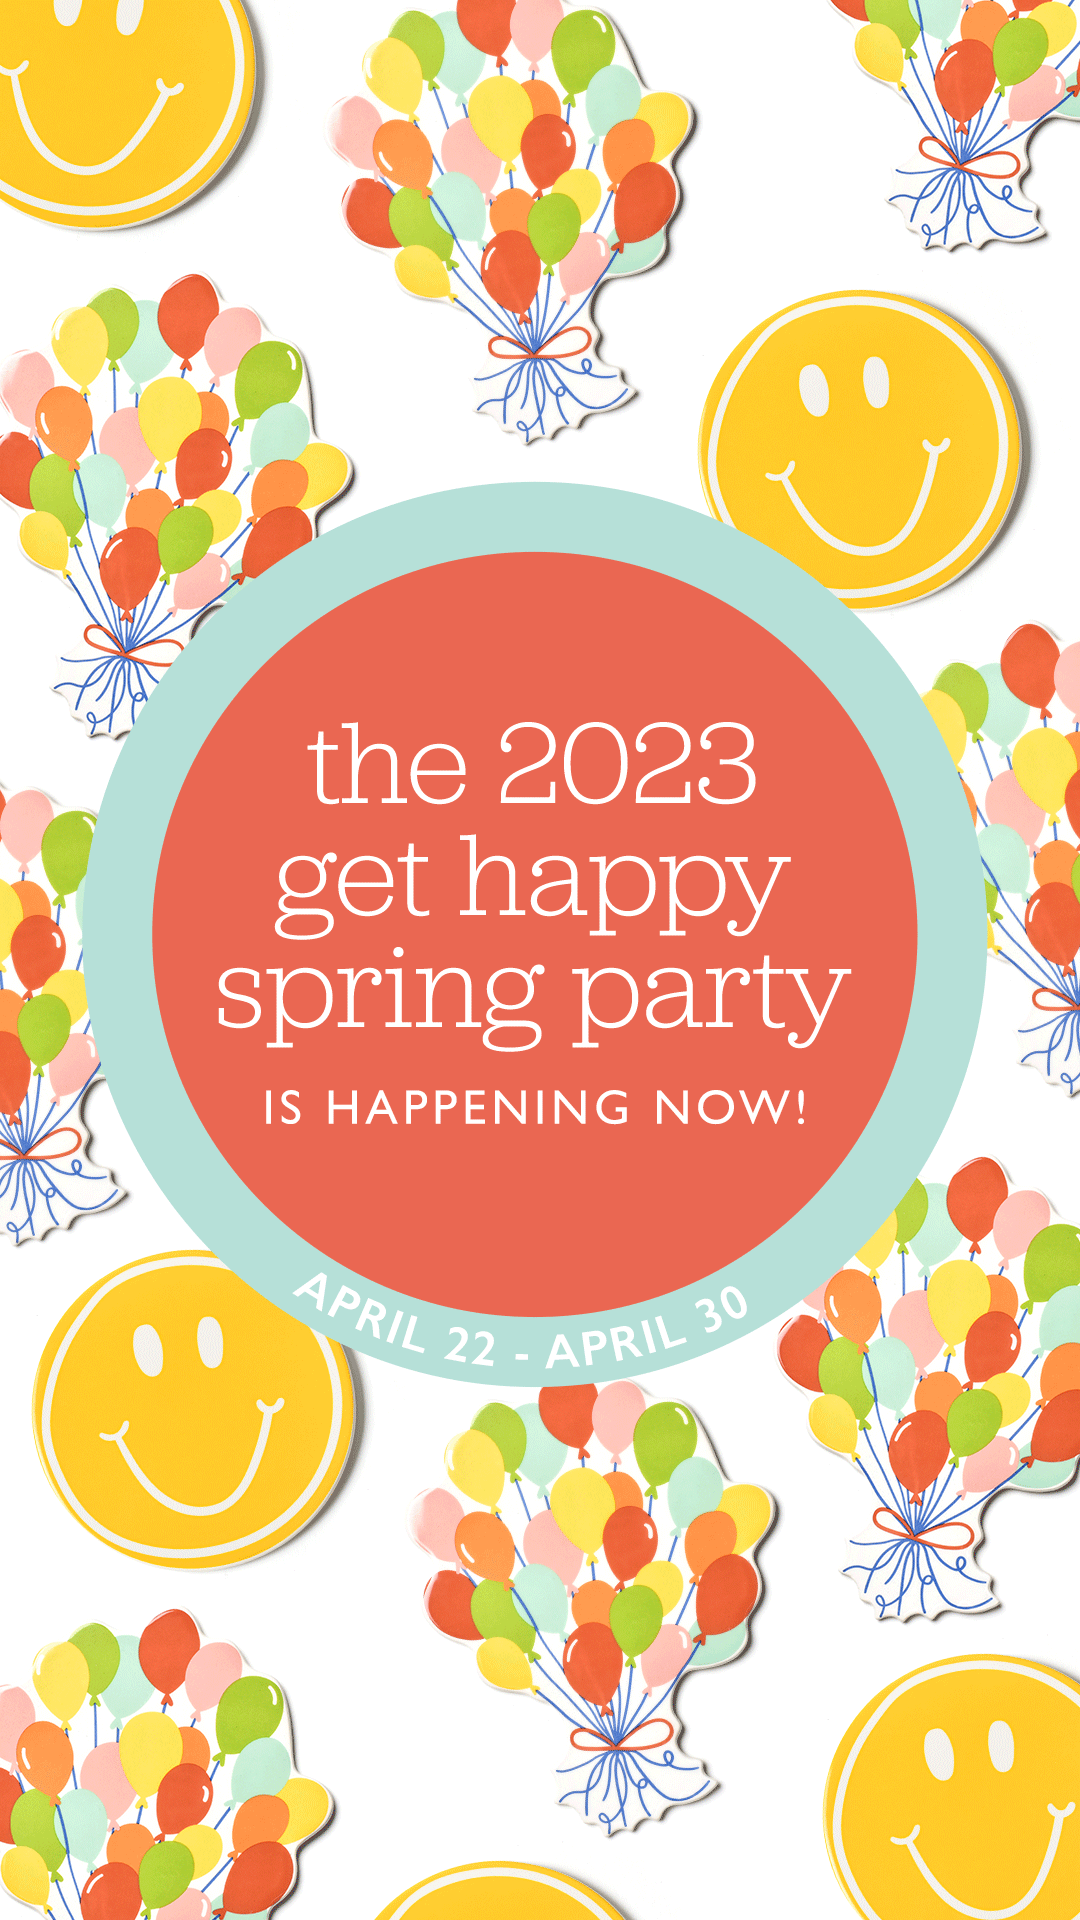 2023---CAM---HEV_Social_Get-Happy-Spring-Party_Happening-Now_Limited-Edition-Attachment-Collage_Story.gif